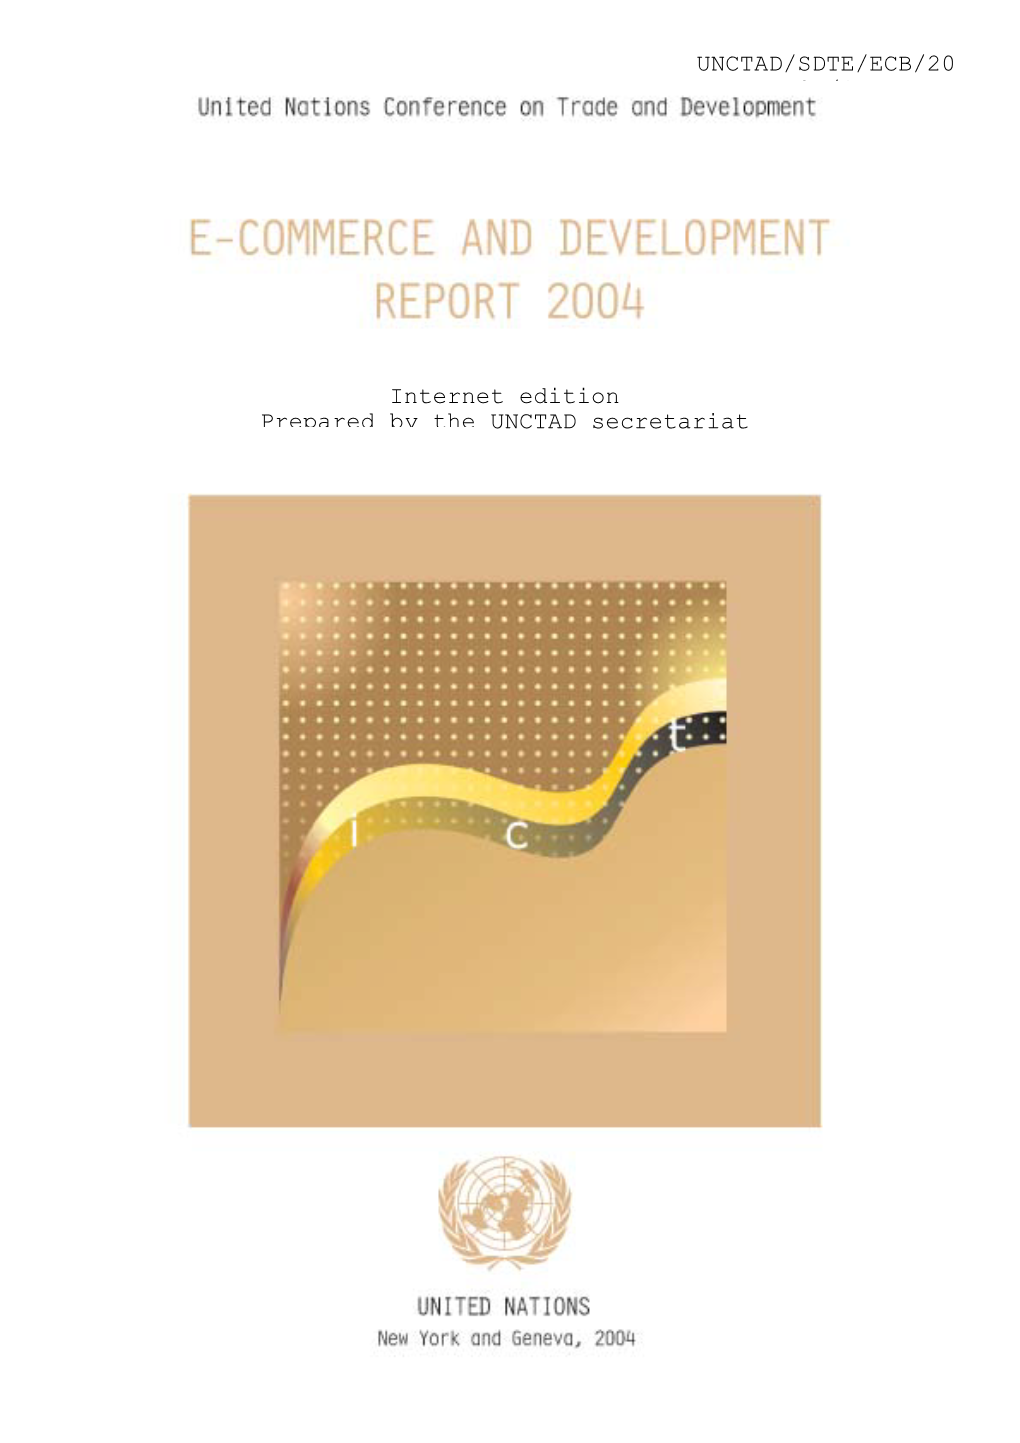 E-COMMERCE and DEVELOPMENT REPORT 2004 Foreword